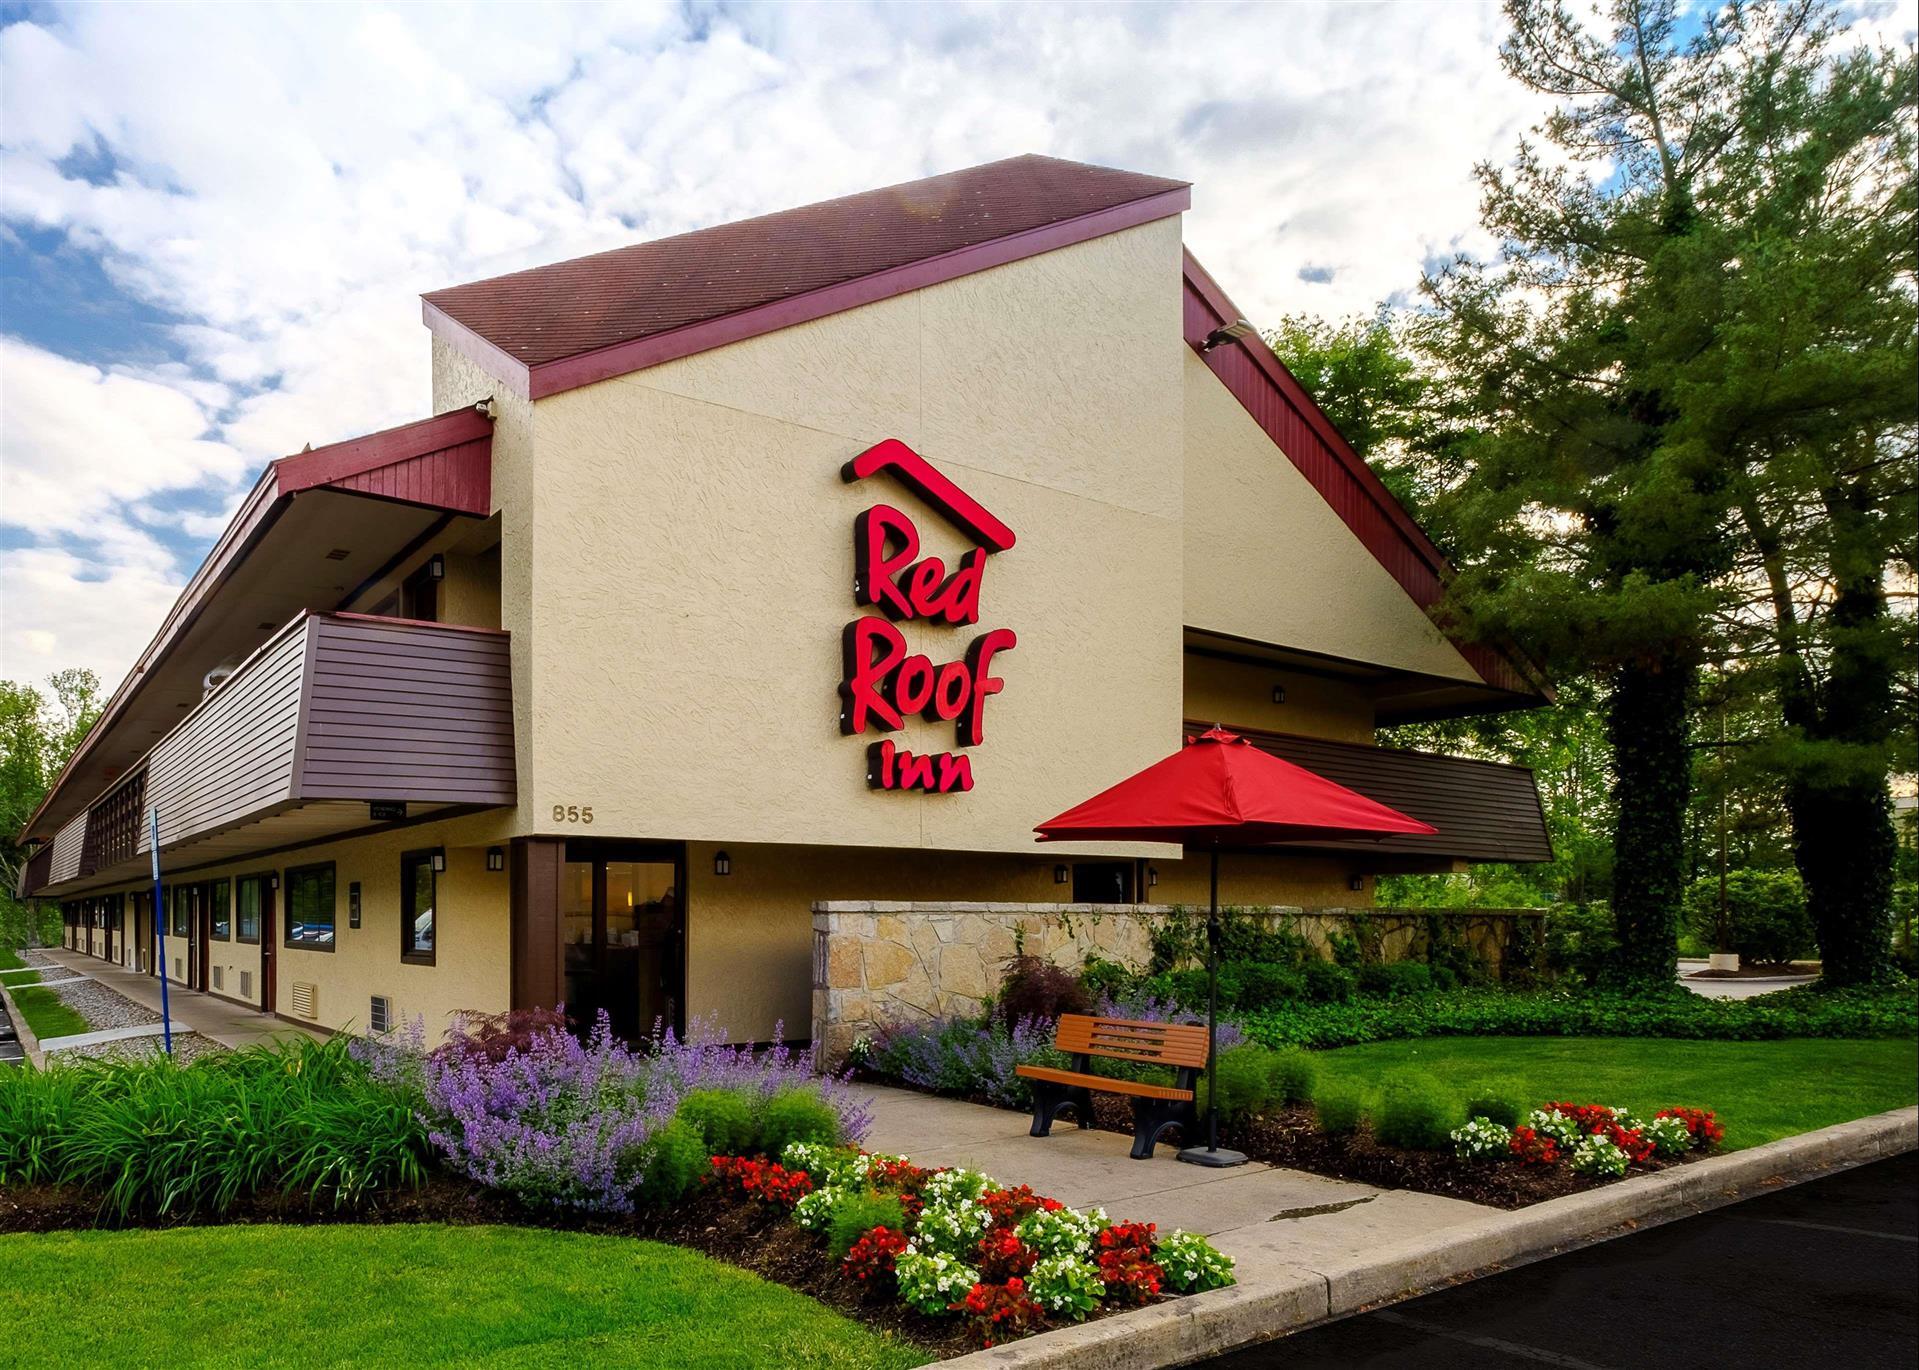 Red Roof Inn Parsippany in Parsippany, NJ